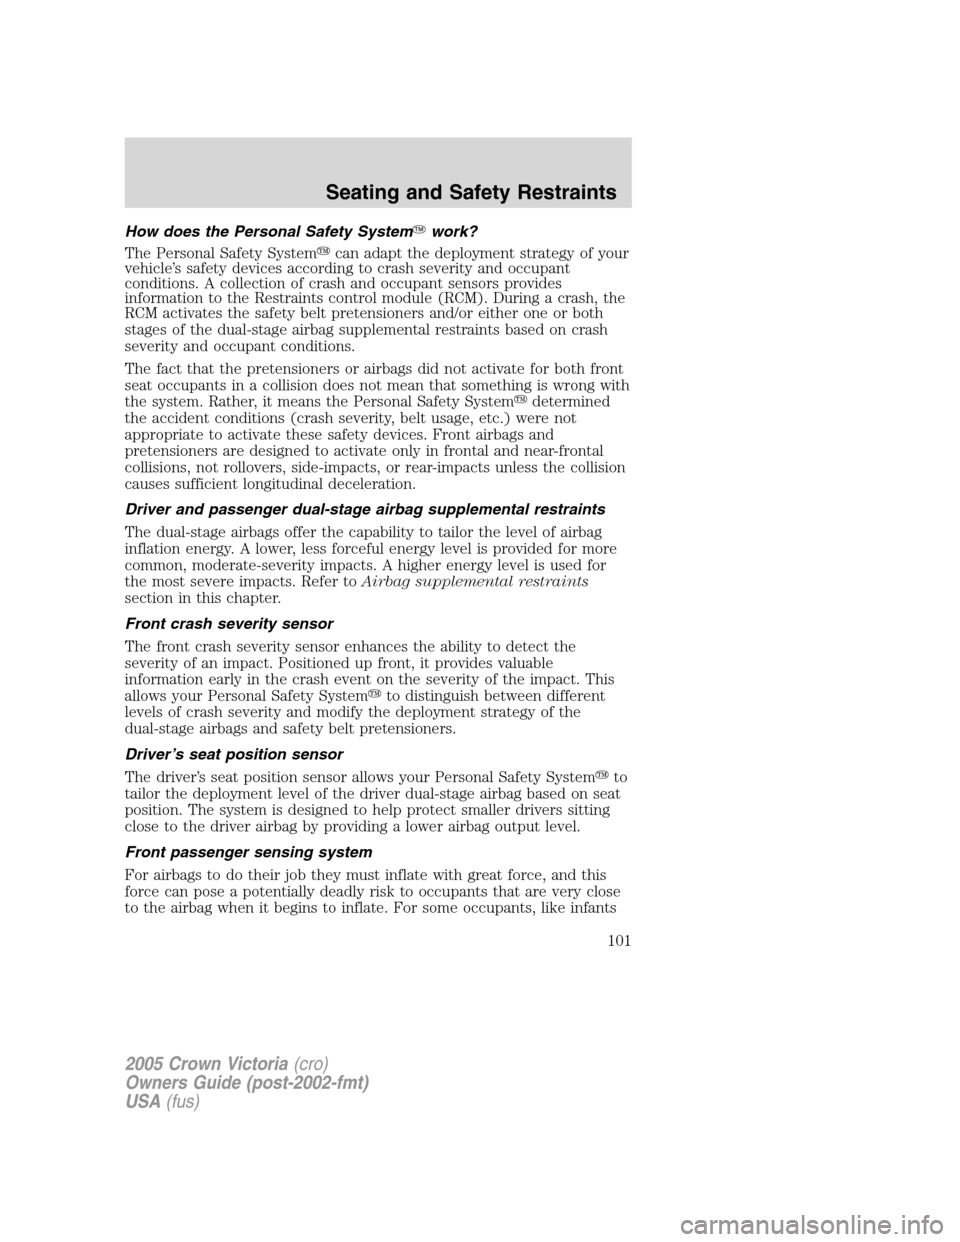 FORD CROWN VICTORIA 2005 2.G Owners Manual How does the Personal Safety Systemwork?
The Personal Safety Systemcan adapt the deployment strategy of your
vehicle’s safety devices according to crash severity and occupant
conditions. A collect